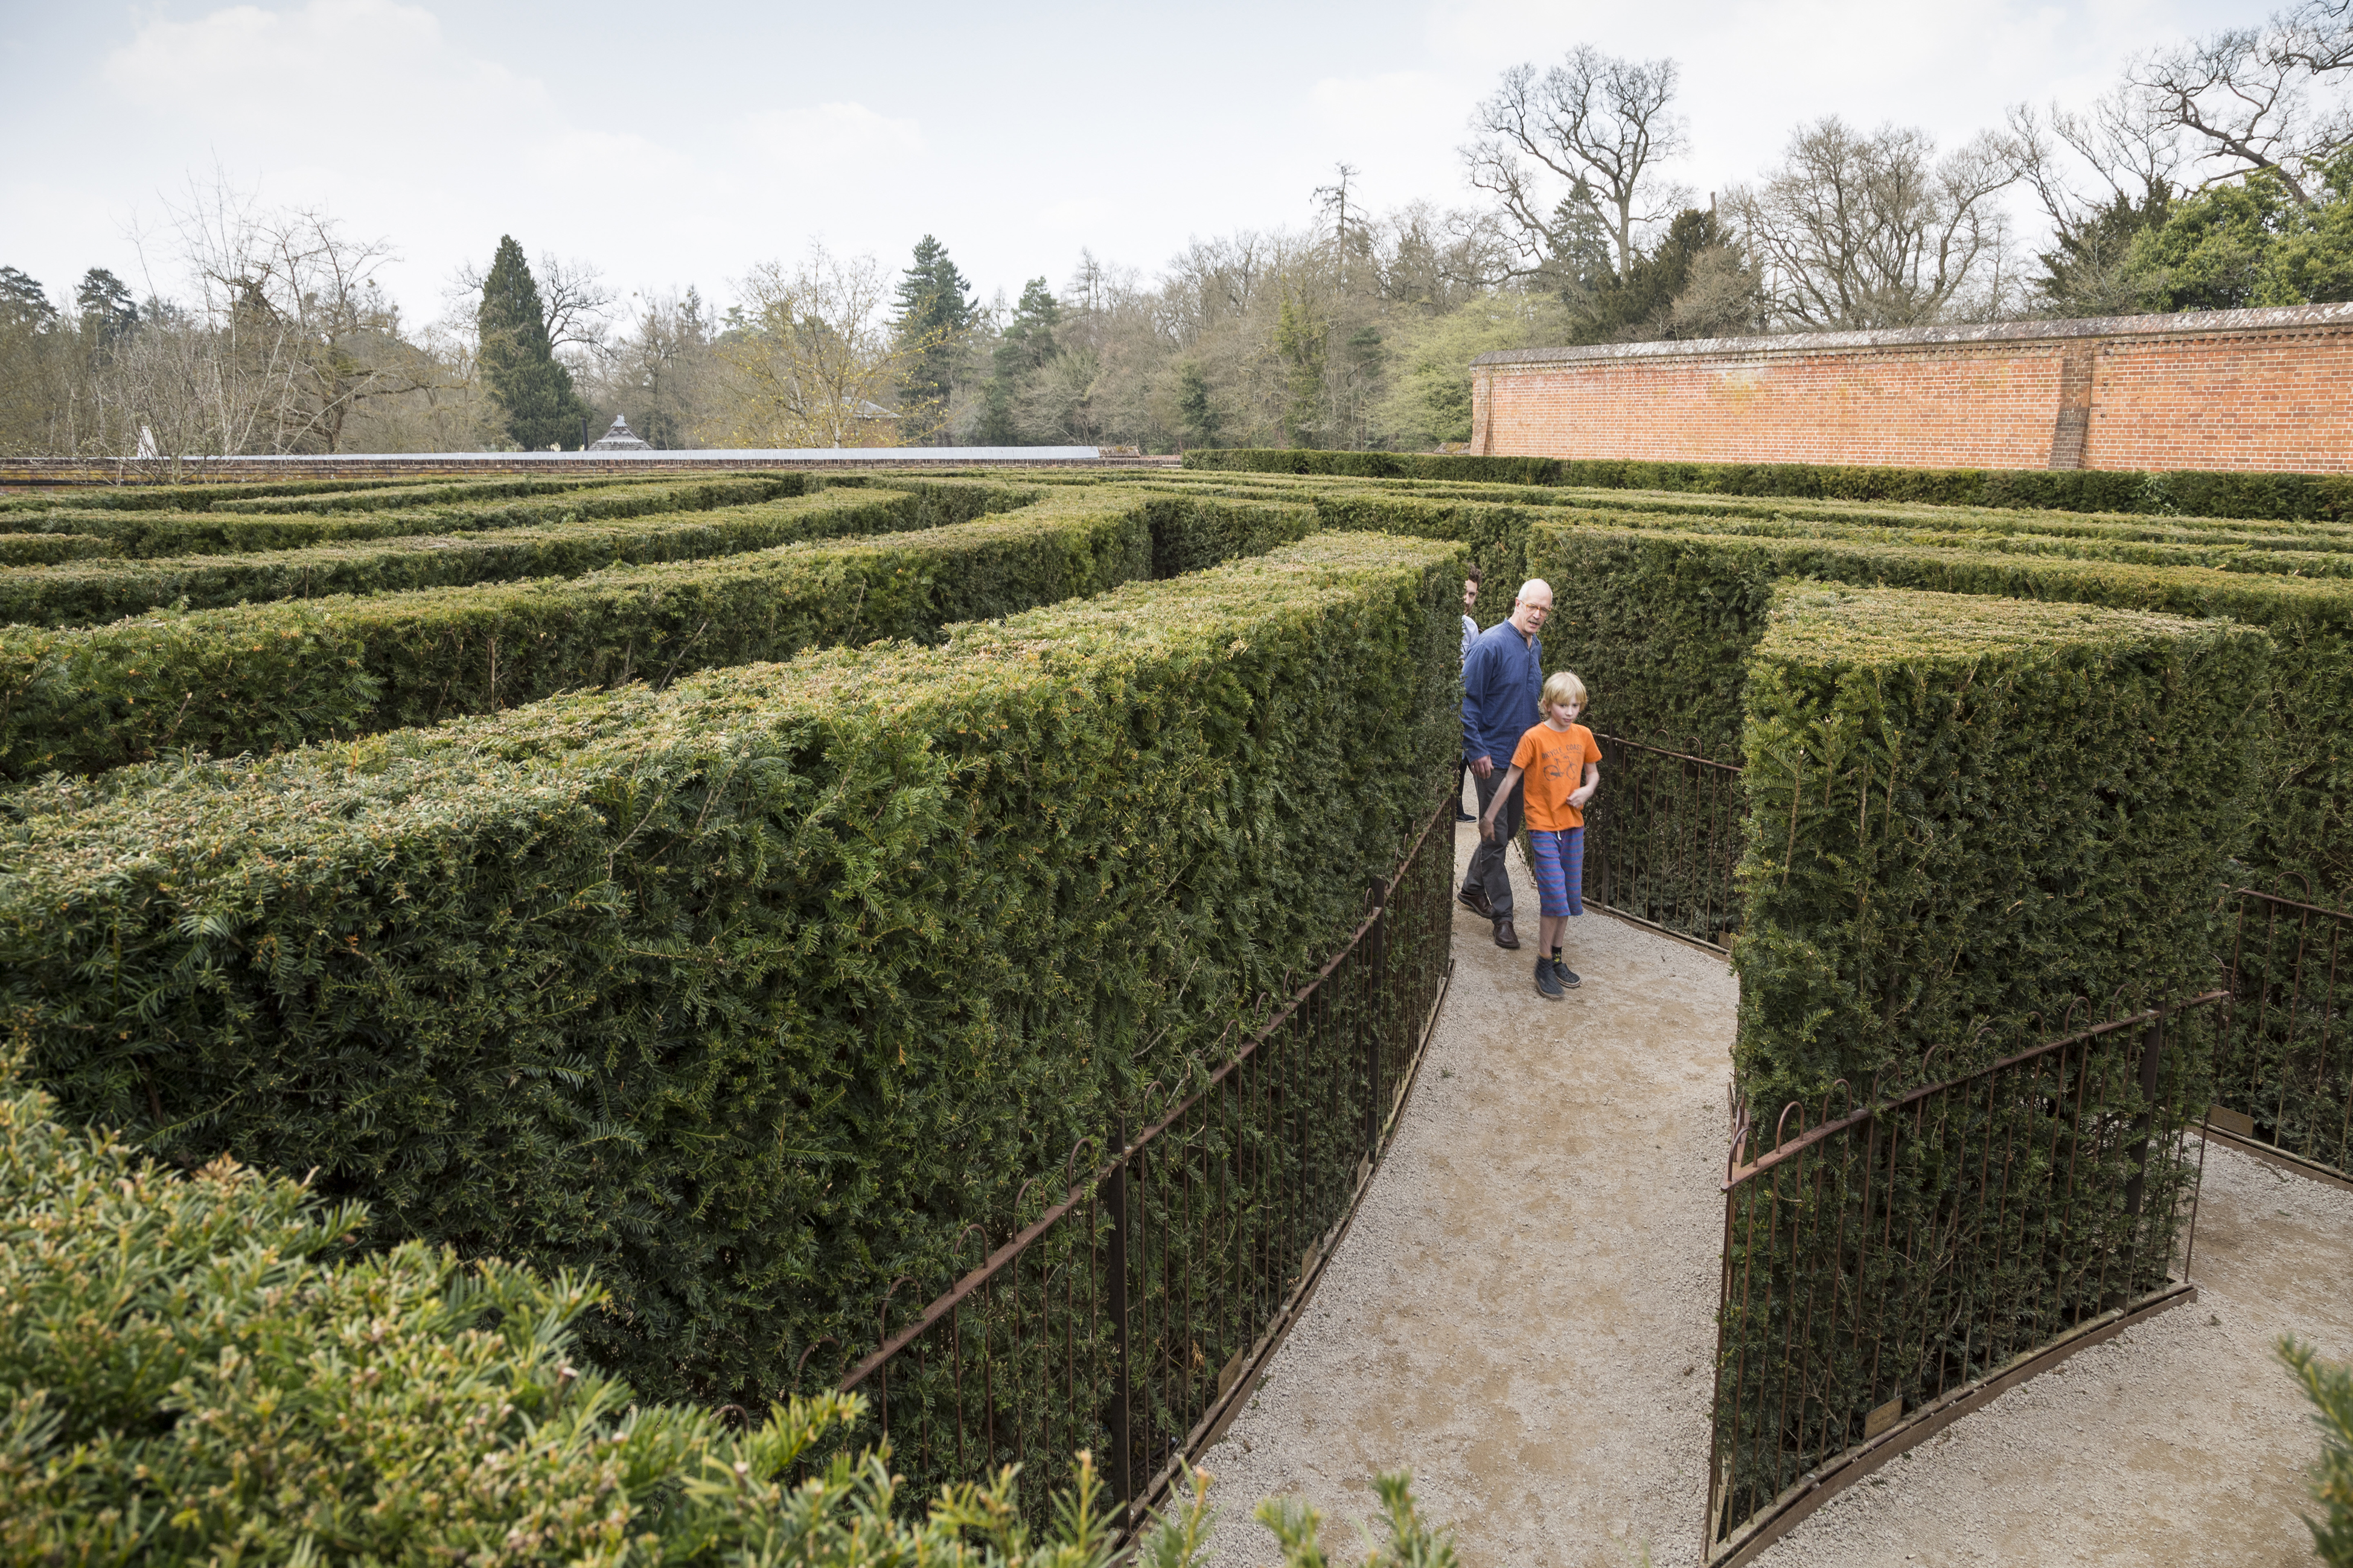 Get lost in the maze at Cliveden (Chris Lacey/National Trust/PA)